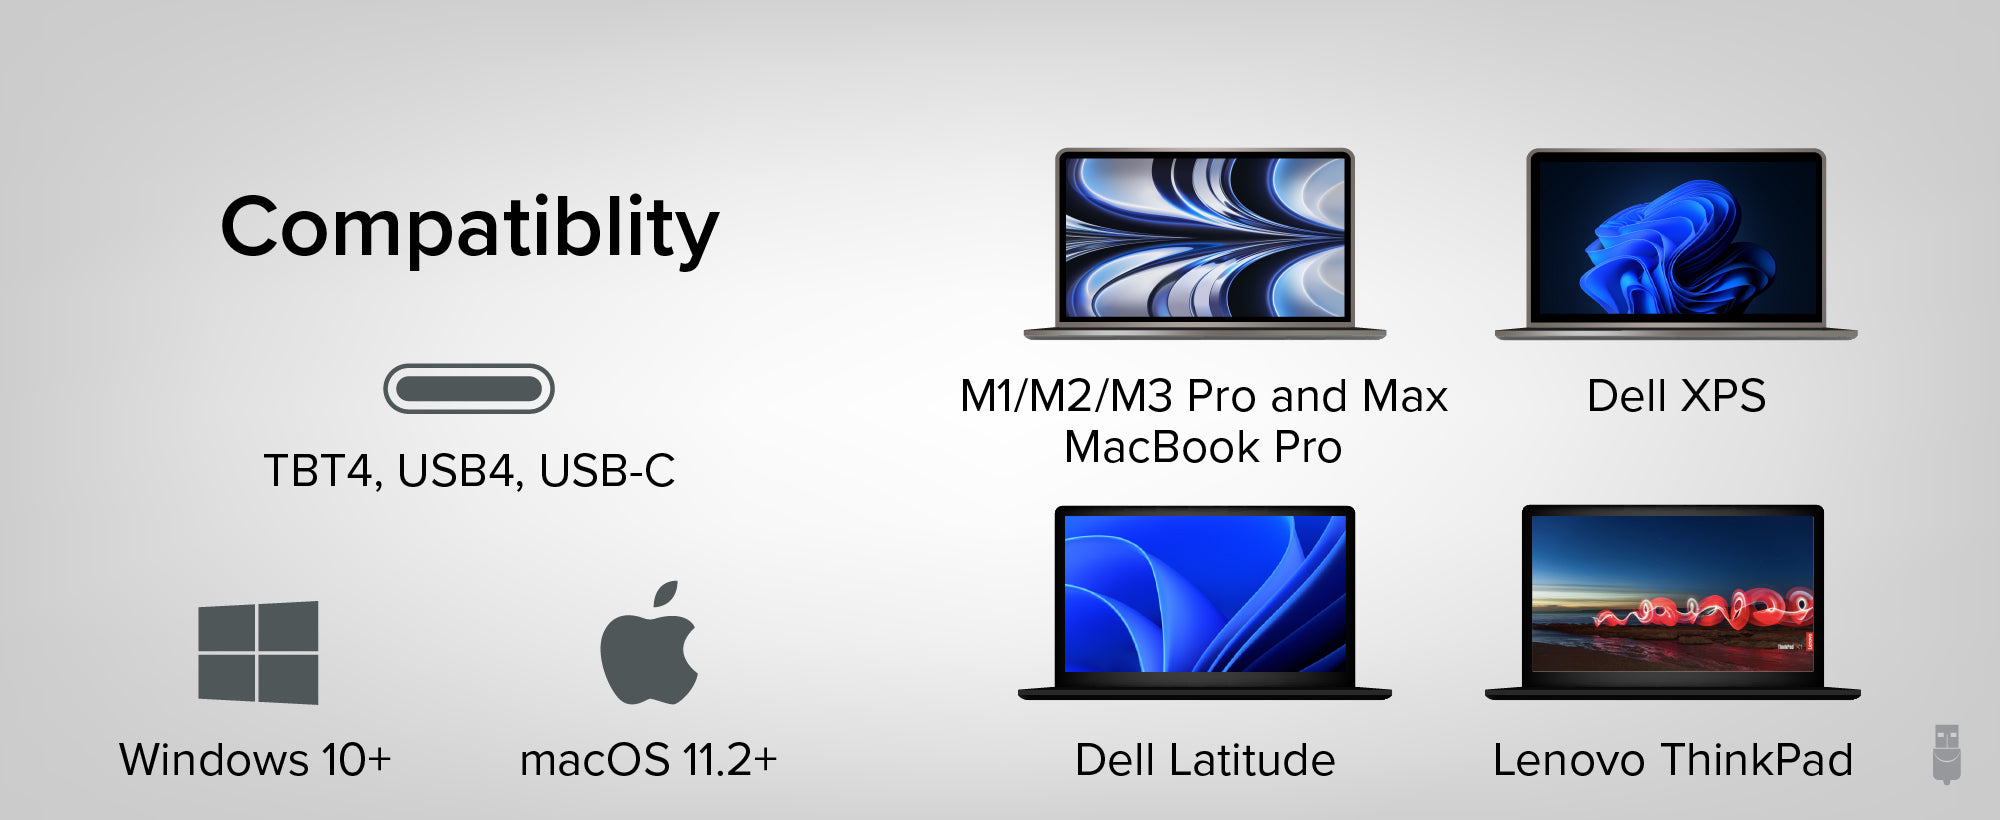 An image showing the TBT4-UD5's compatibility with popular devices